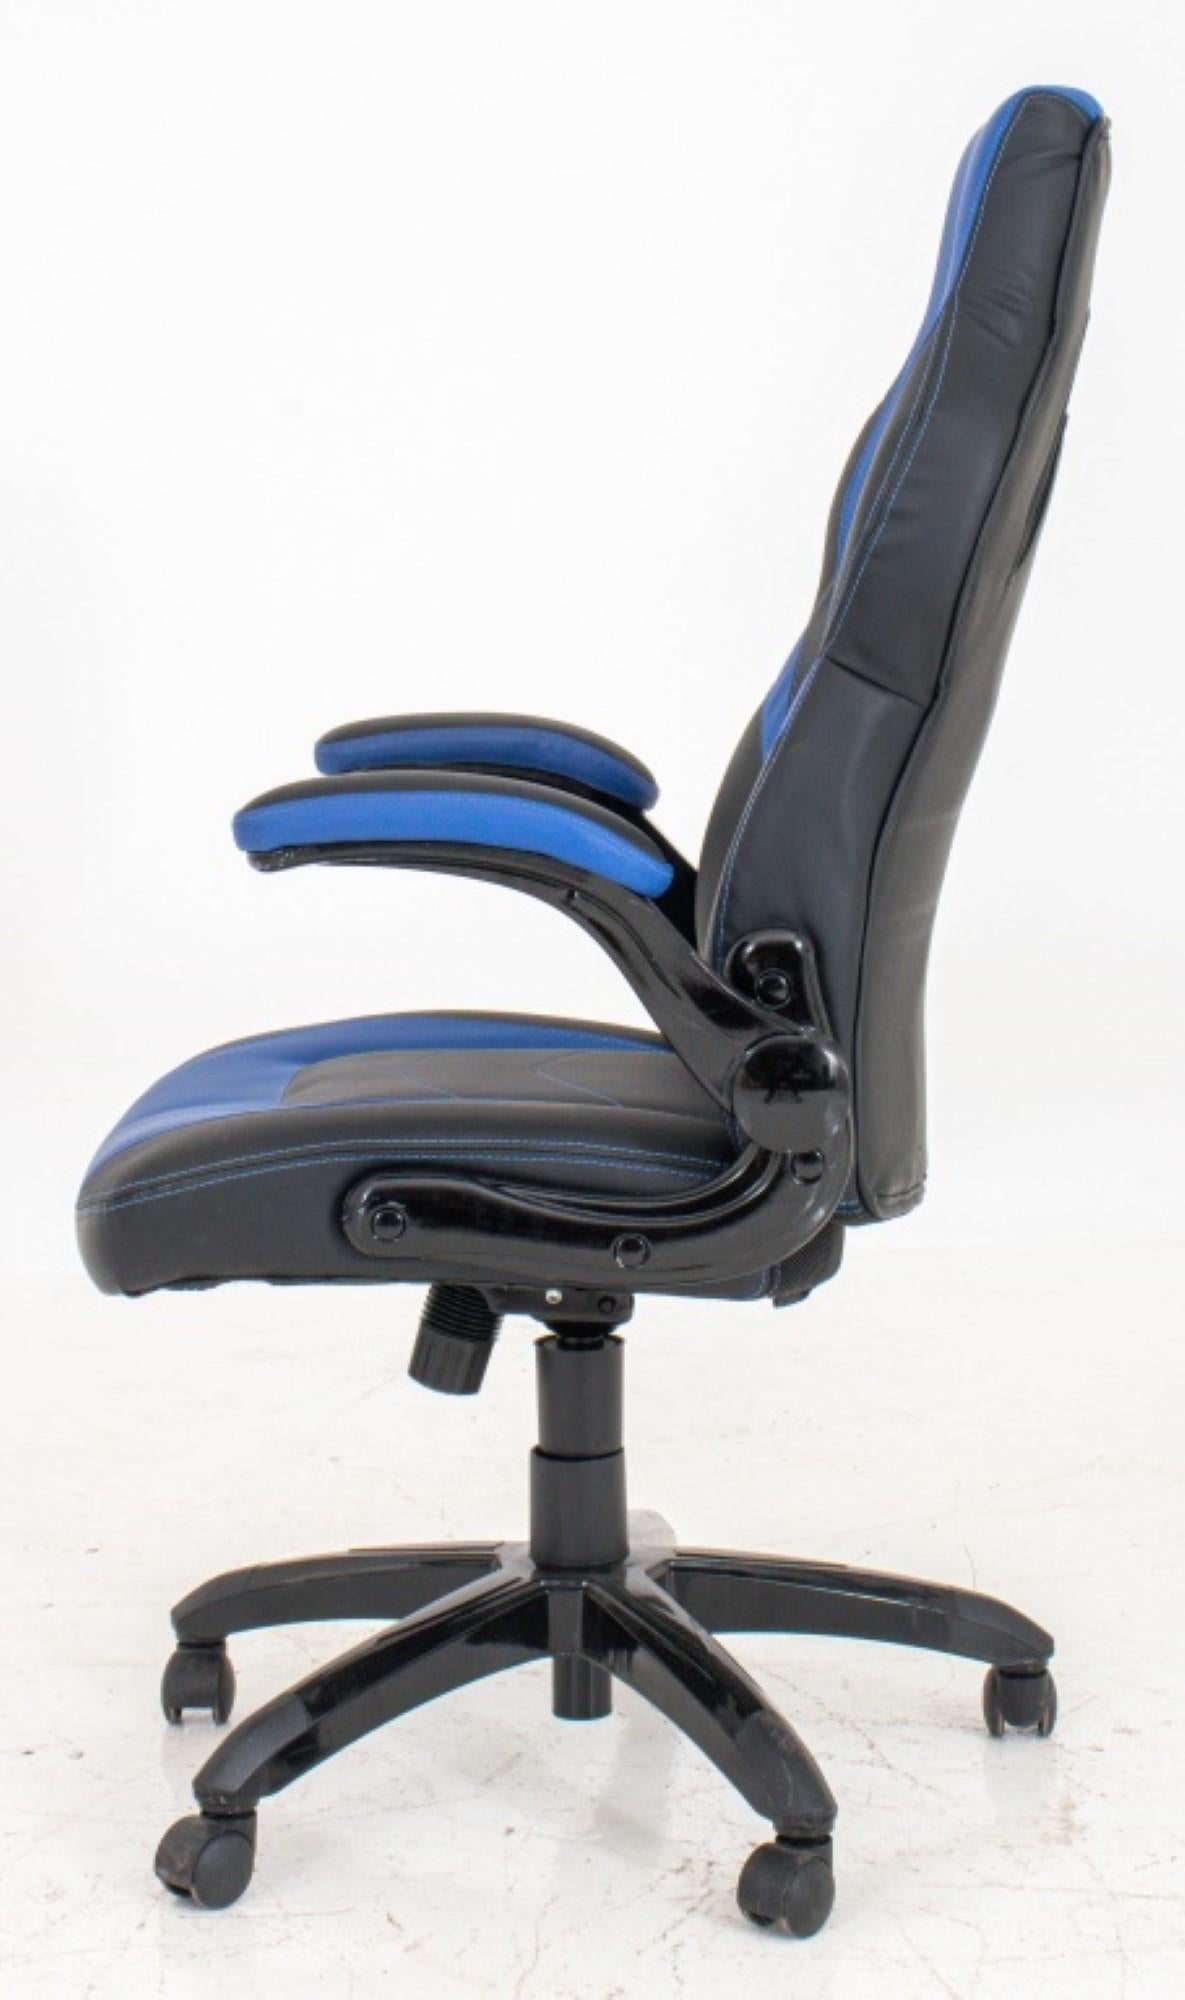 Upholstery Black & Blue Extra Wide Gamer Chair Desk Chair For Sale